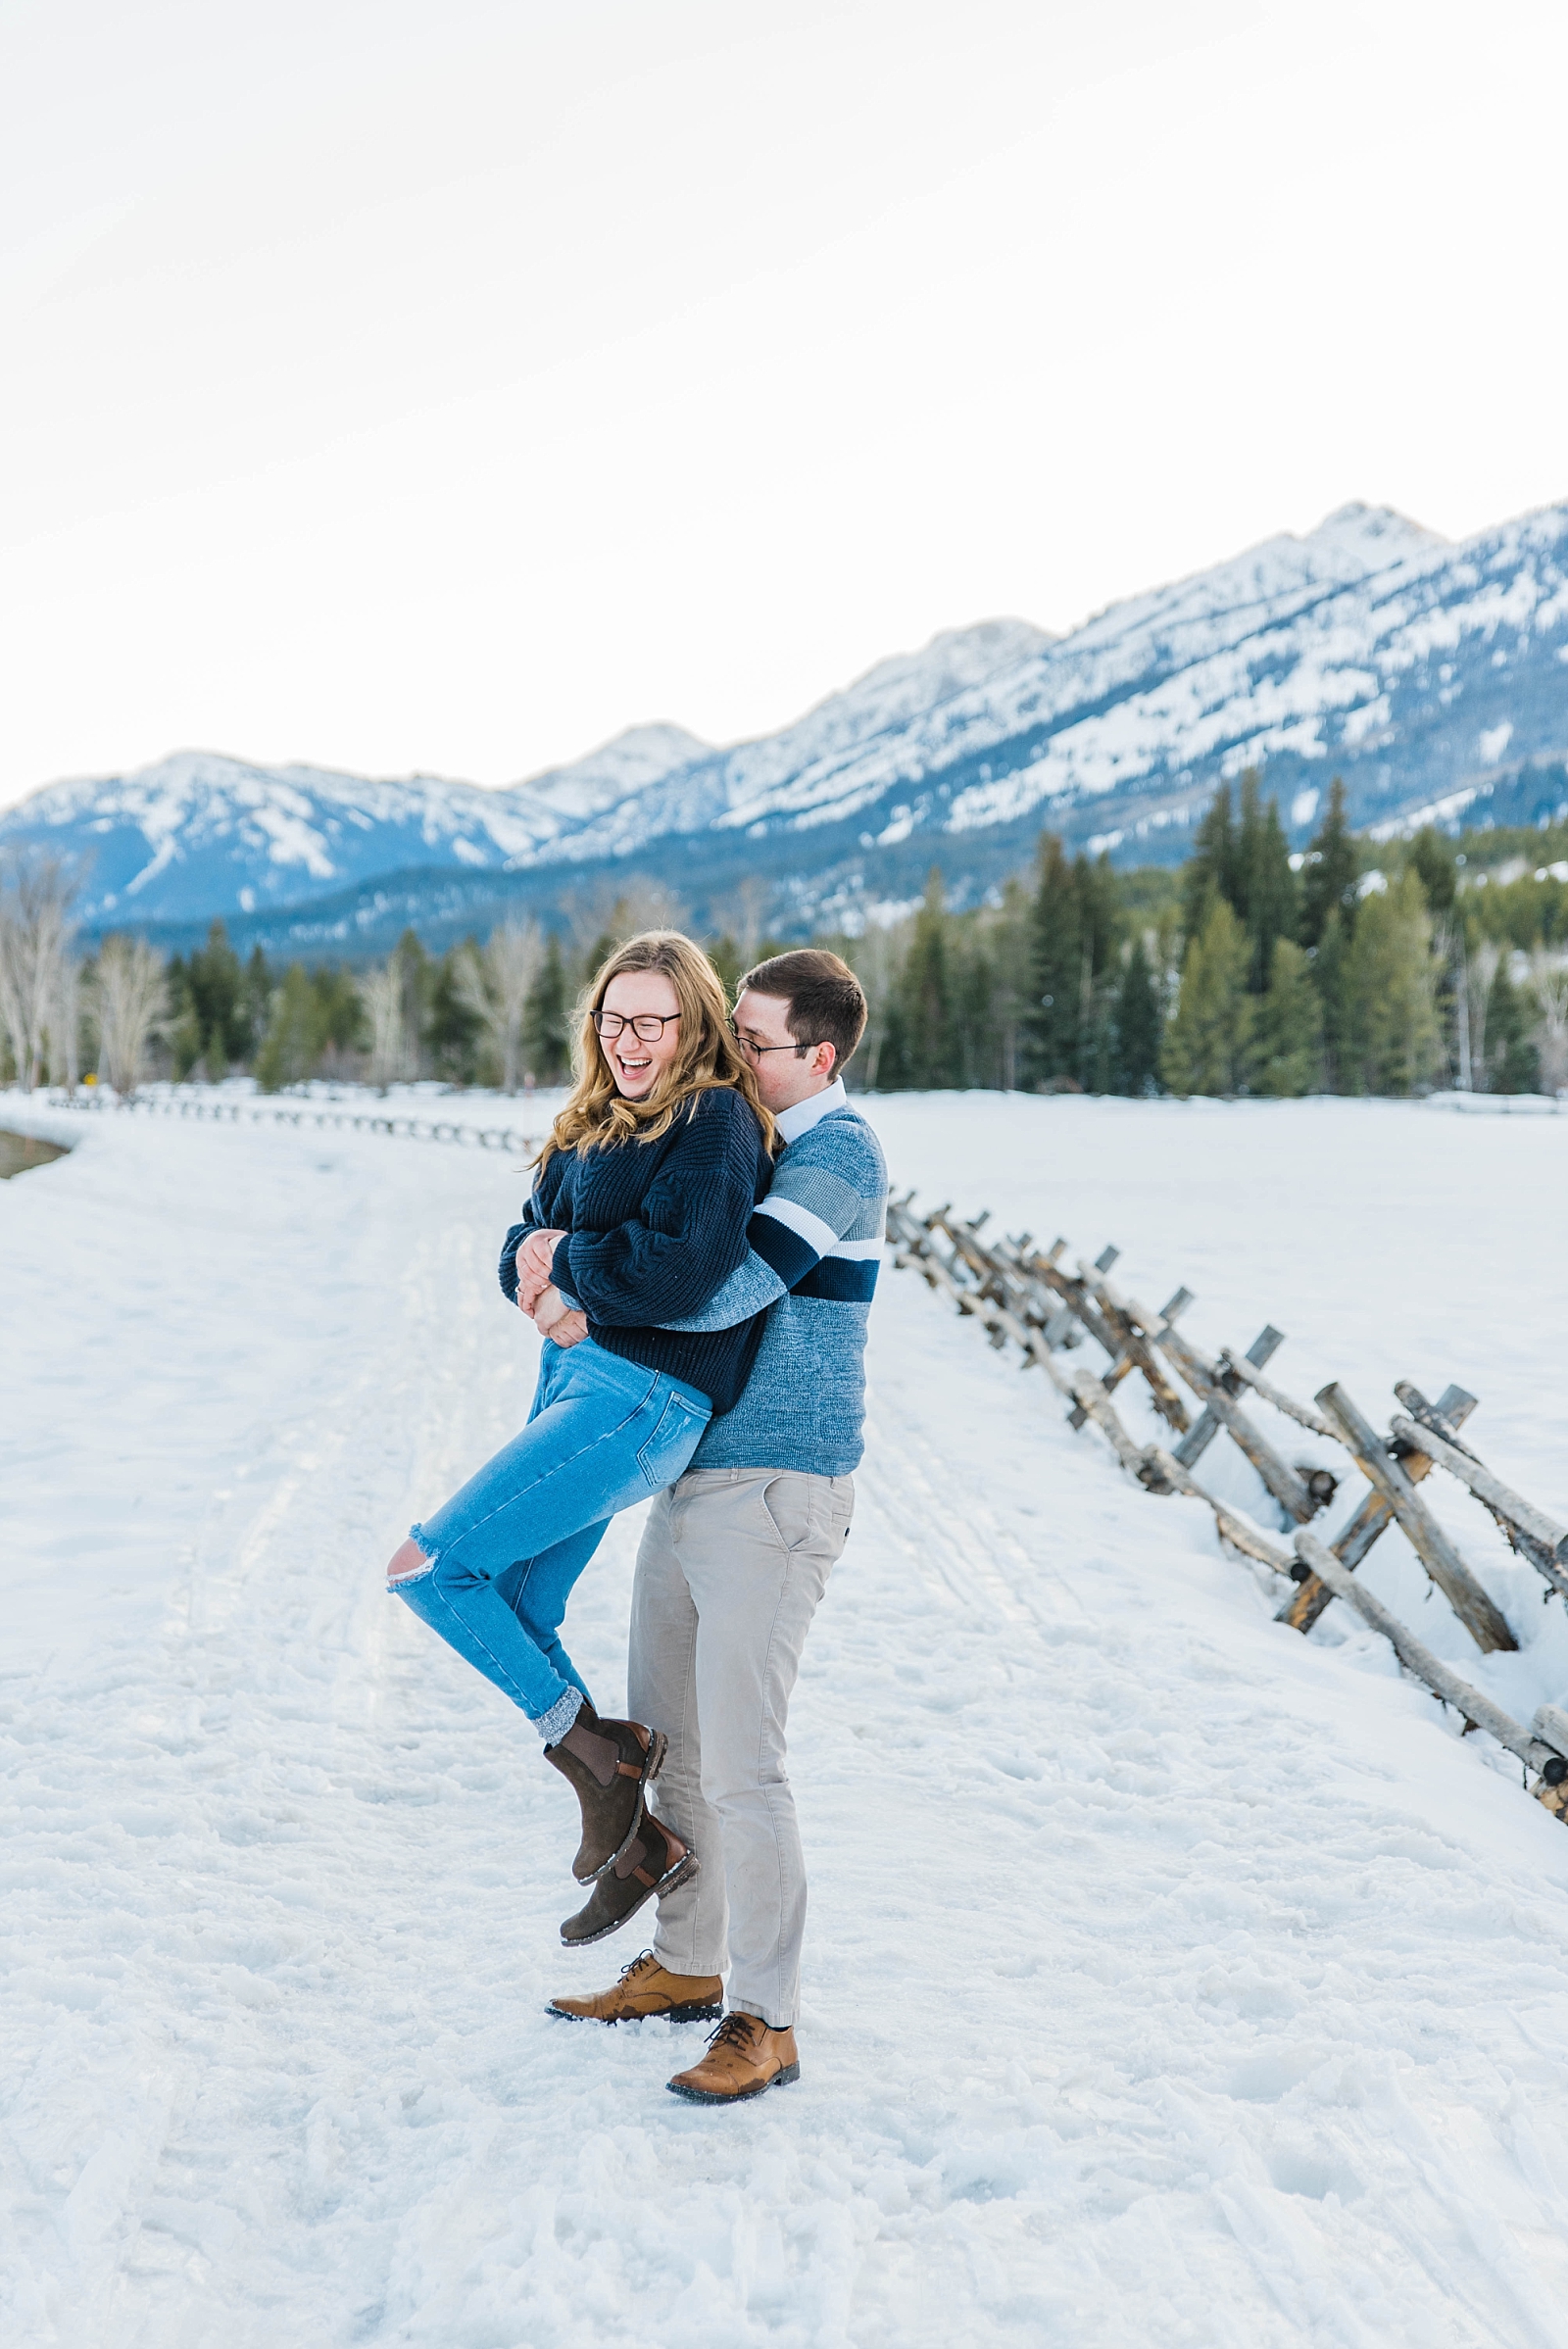 Jackson Hole Engagement Photos couple laughing and having fun together during winter engagement session